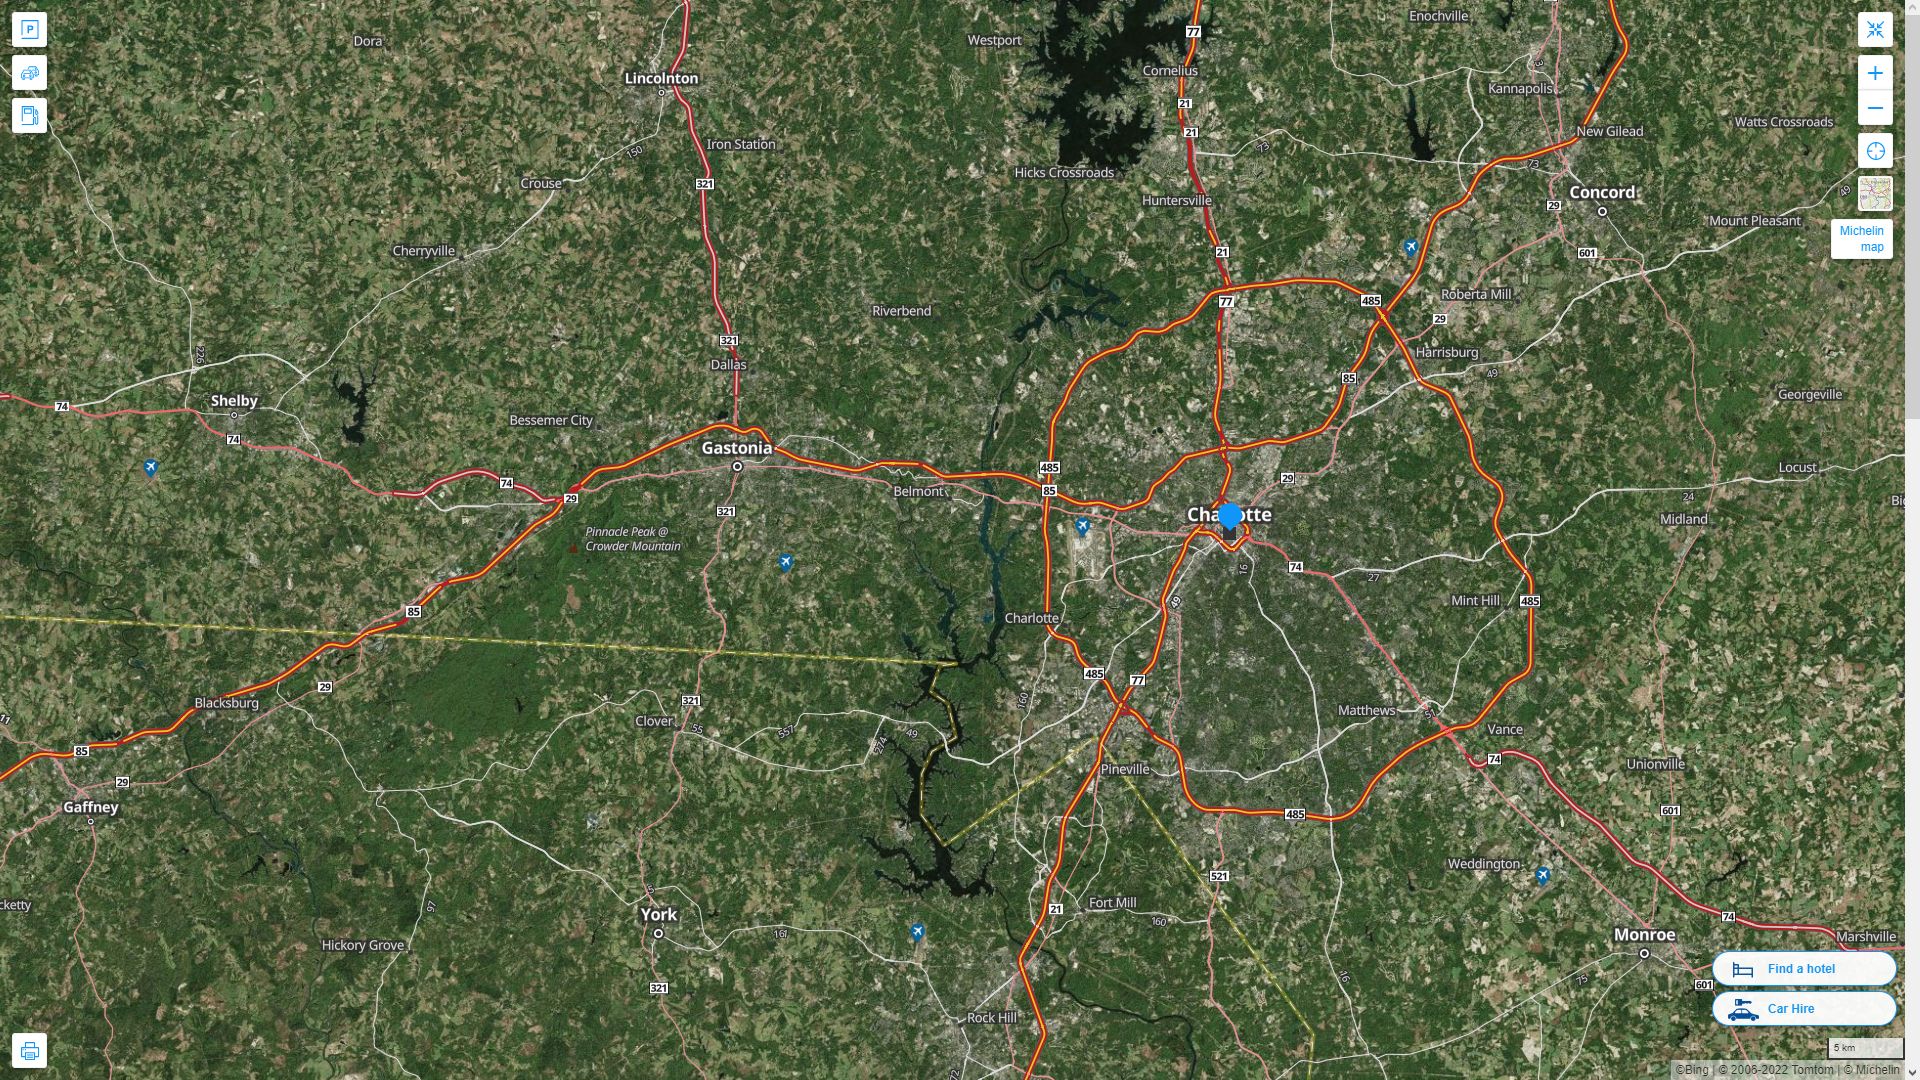 Charlotte North Carolina Highway and Road Map with Satellite View